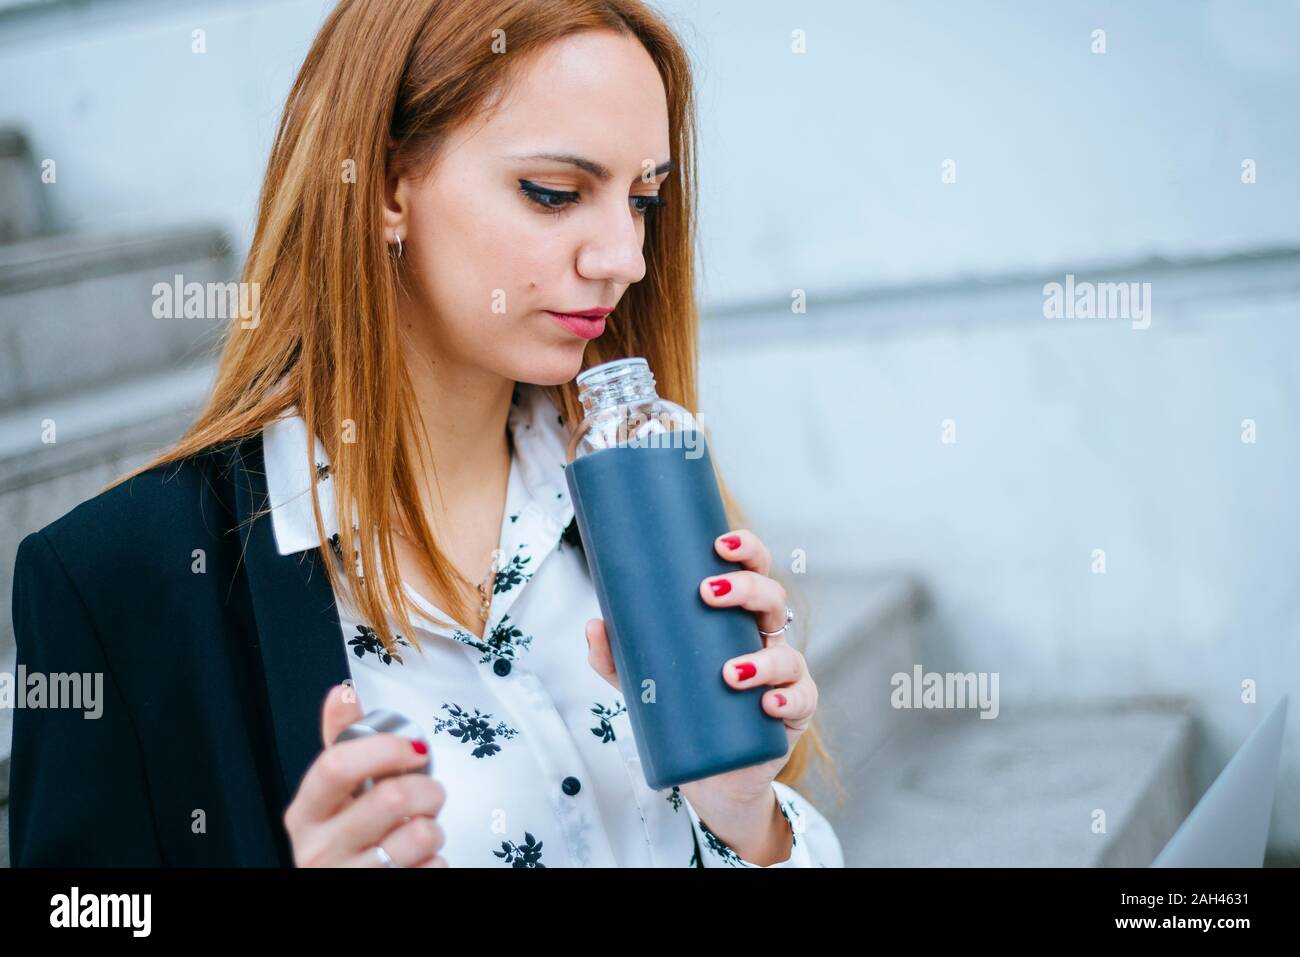 Young businesswoman rinking from reusable bottle outdoors Stock Photo